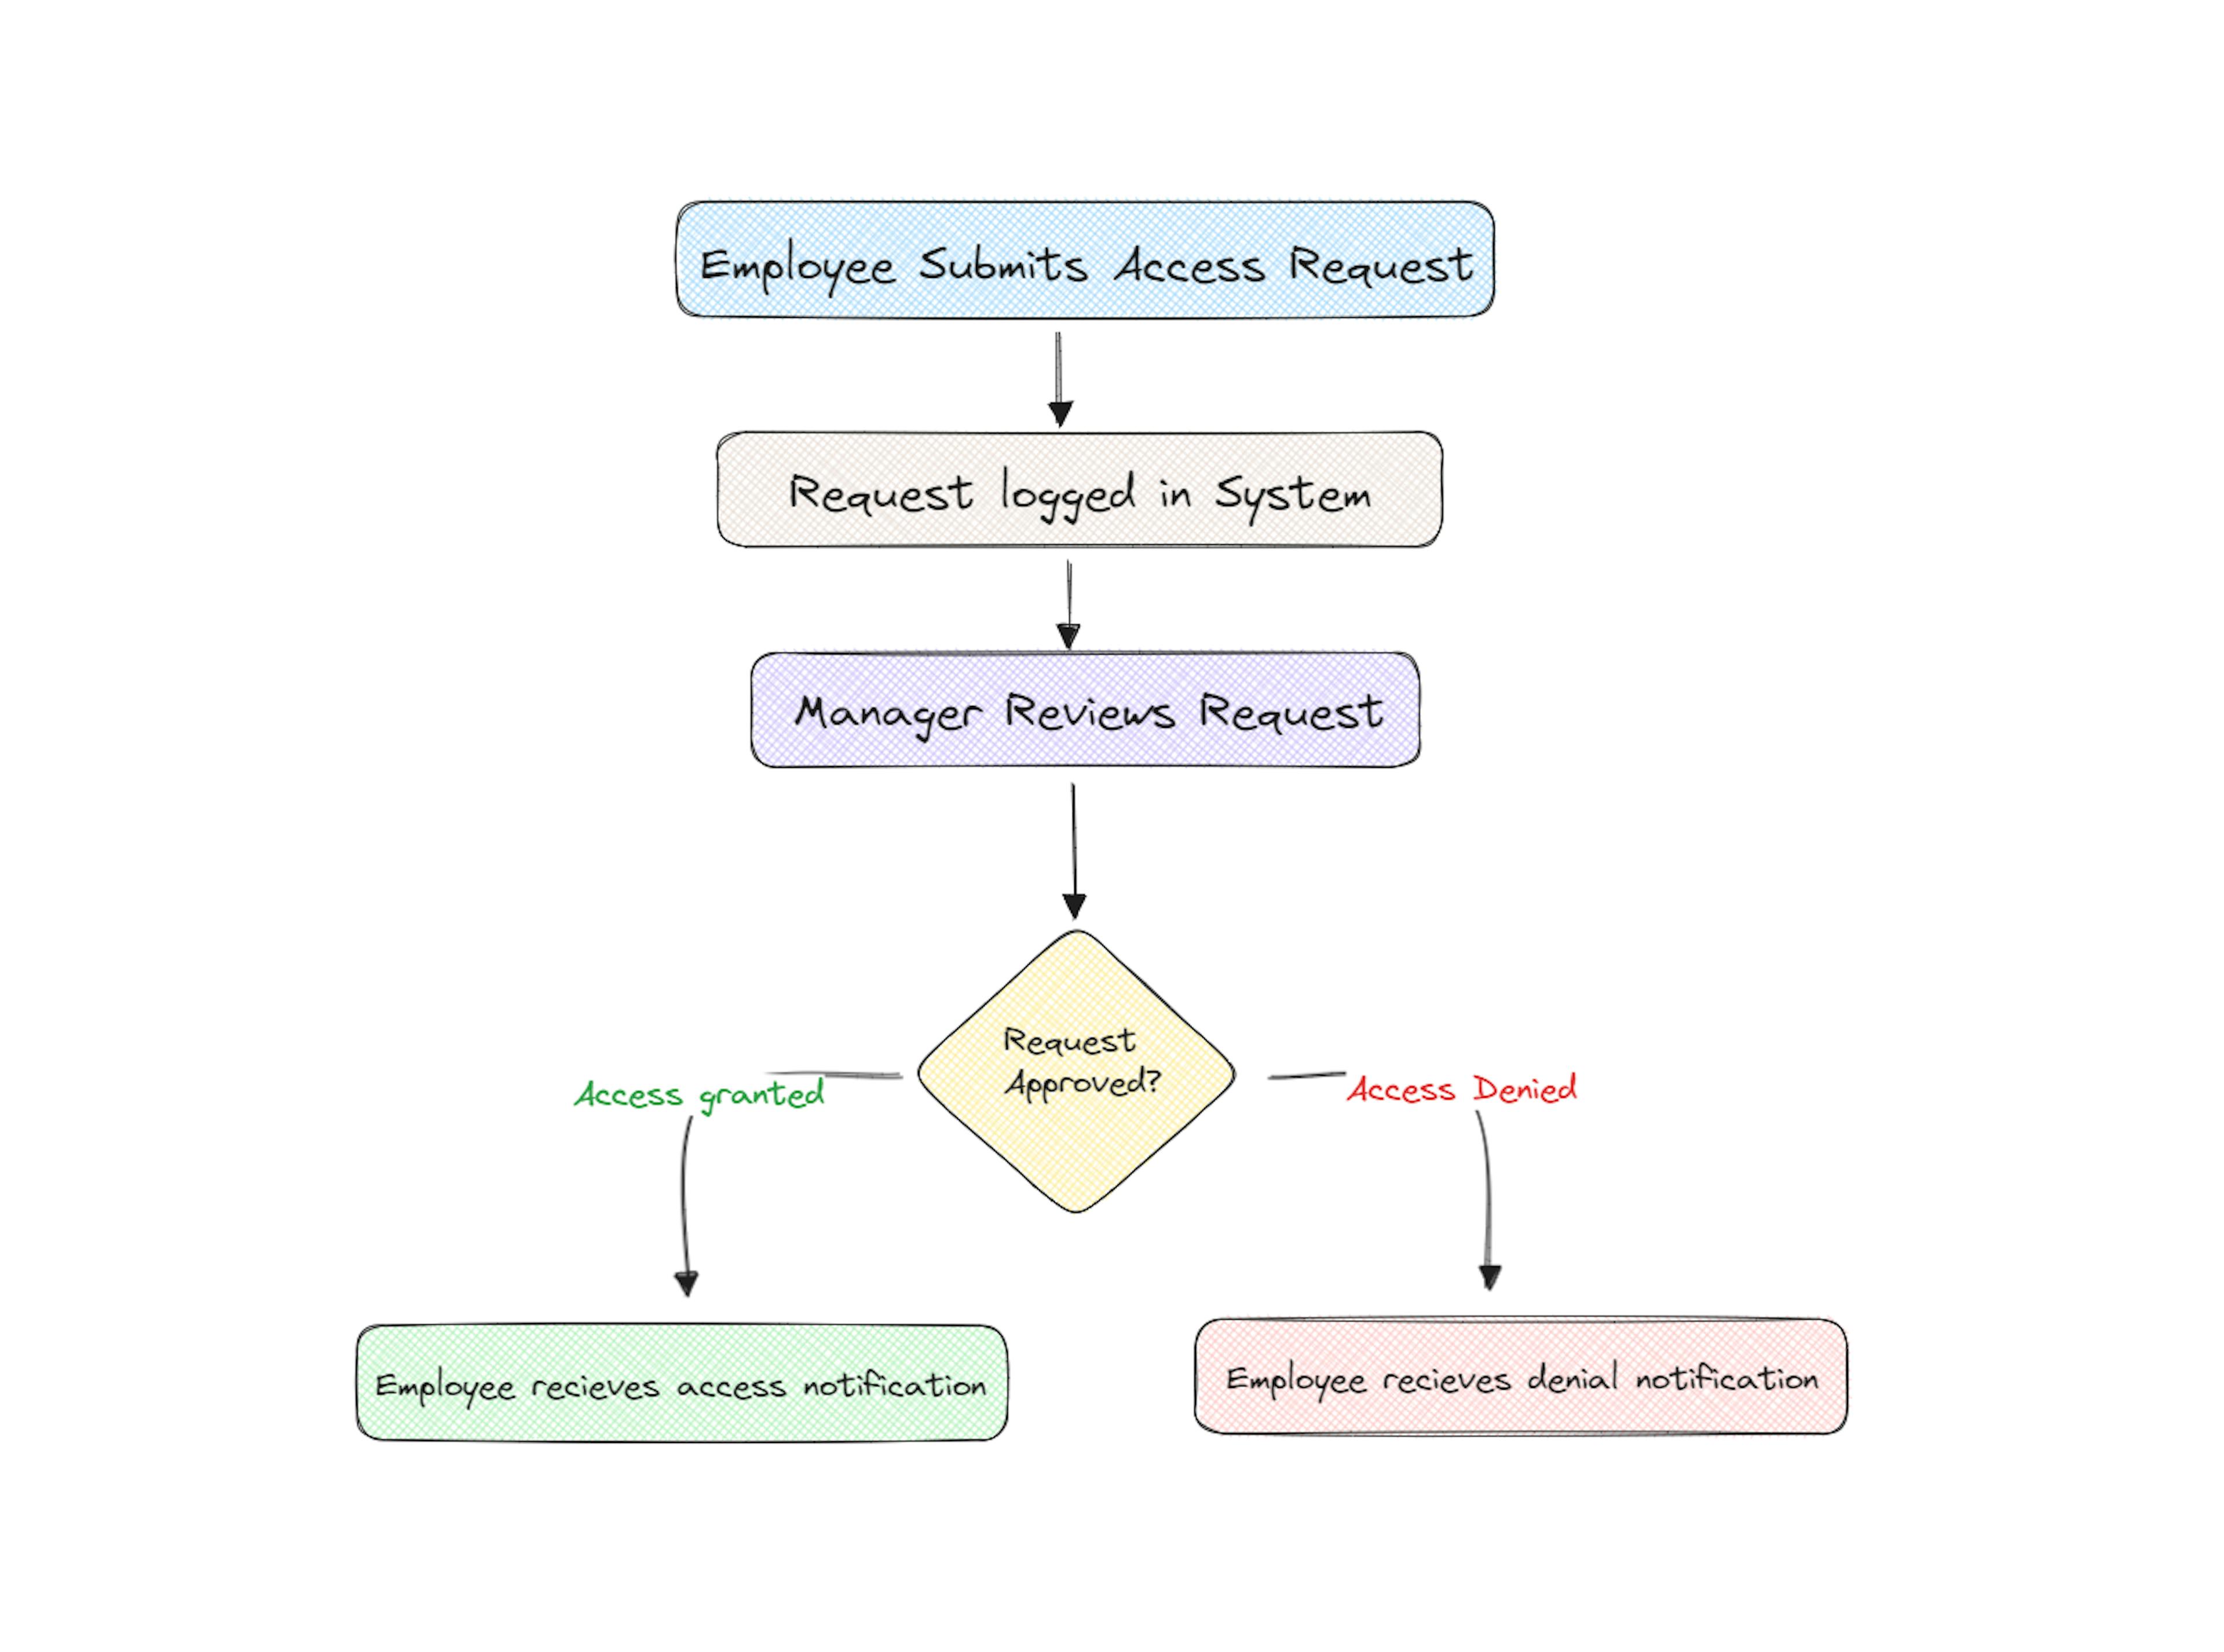 Flowchart showing the process of an employee access request. The steps are: "Employee Submits Access Request," "Request logged in System," "Manager Reviews Request," Decision Diamond "Request Approved?". If approved, the process leads to "Employee receives access notification." If denied, the outcome is "Employee receives denial notification."